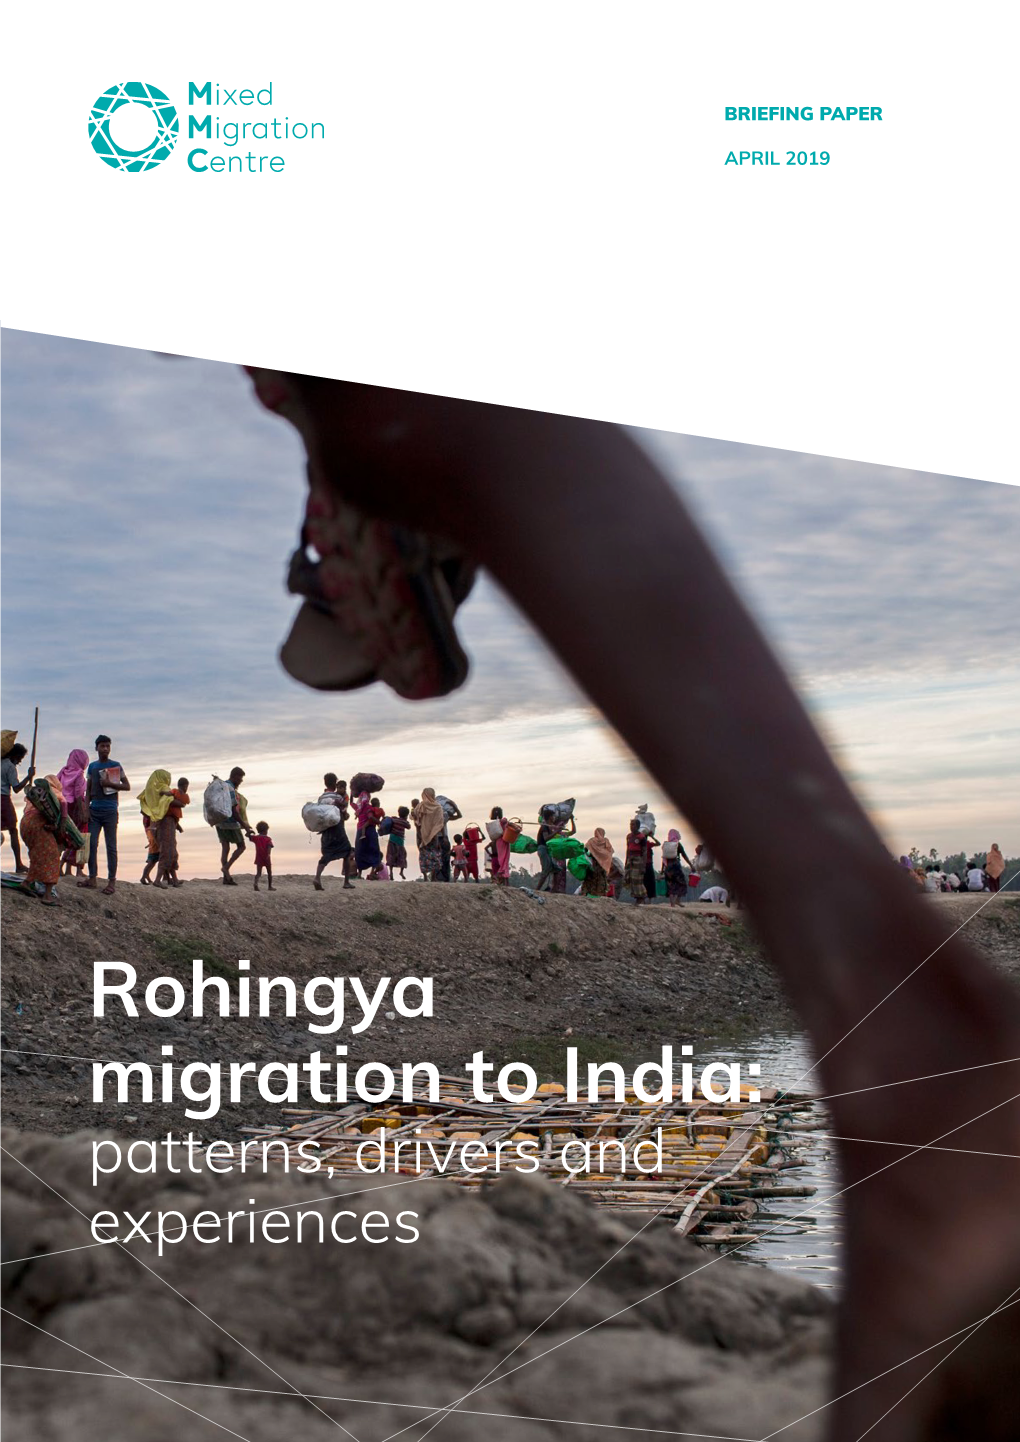 Rohingya Migration to India: Patterns, Drivers and Experiences This Study Was Carried out by the Development and Justice Initiative (DAJI), Commissioned by MMC Asia